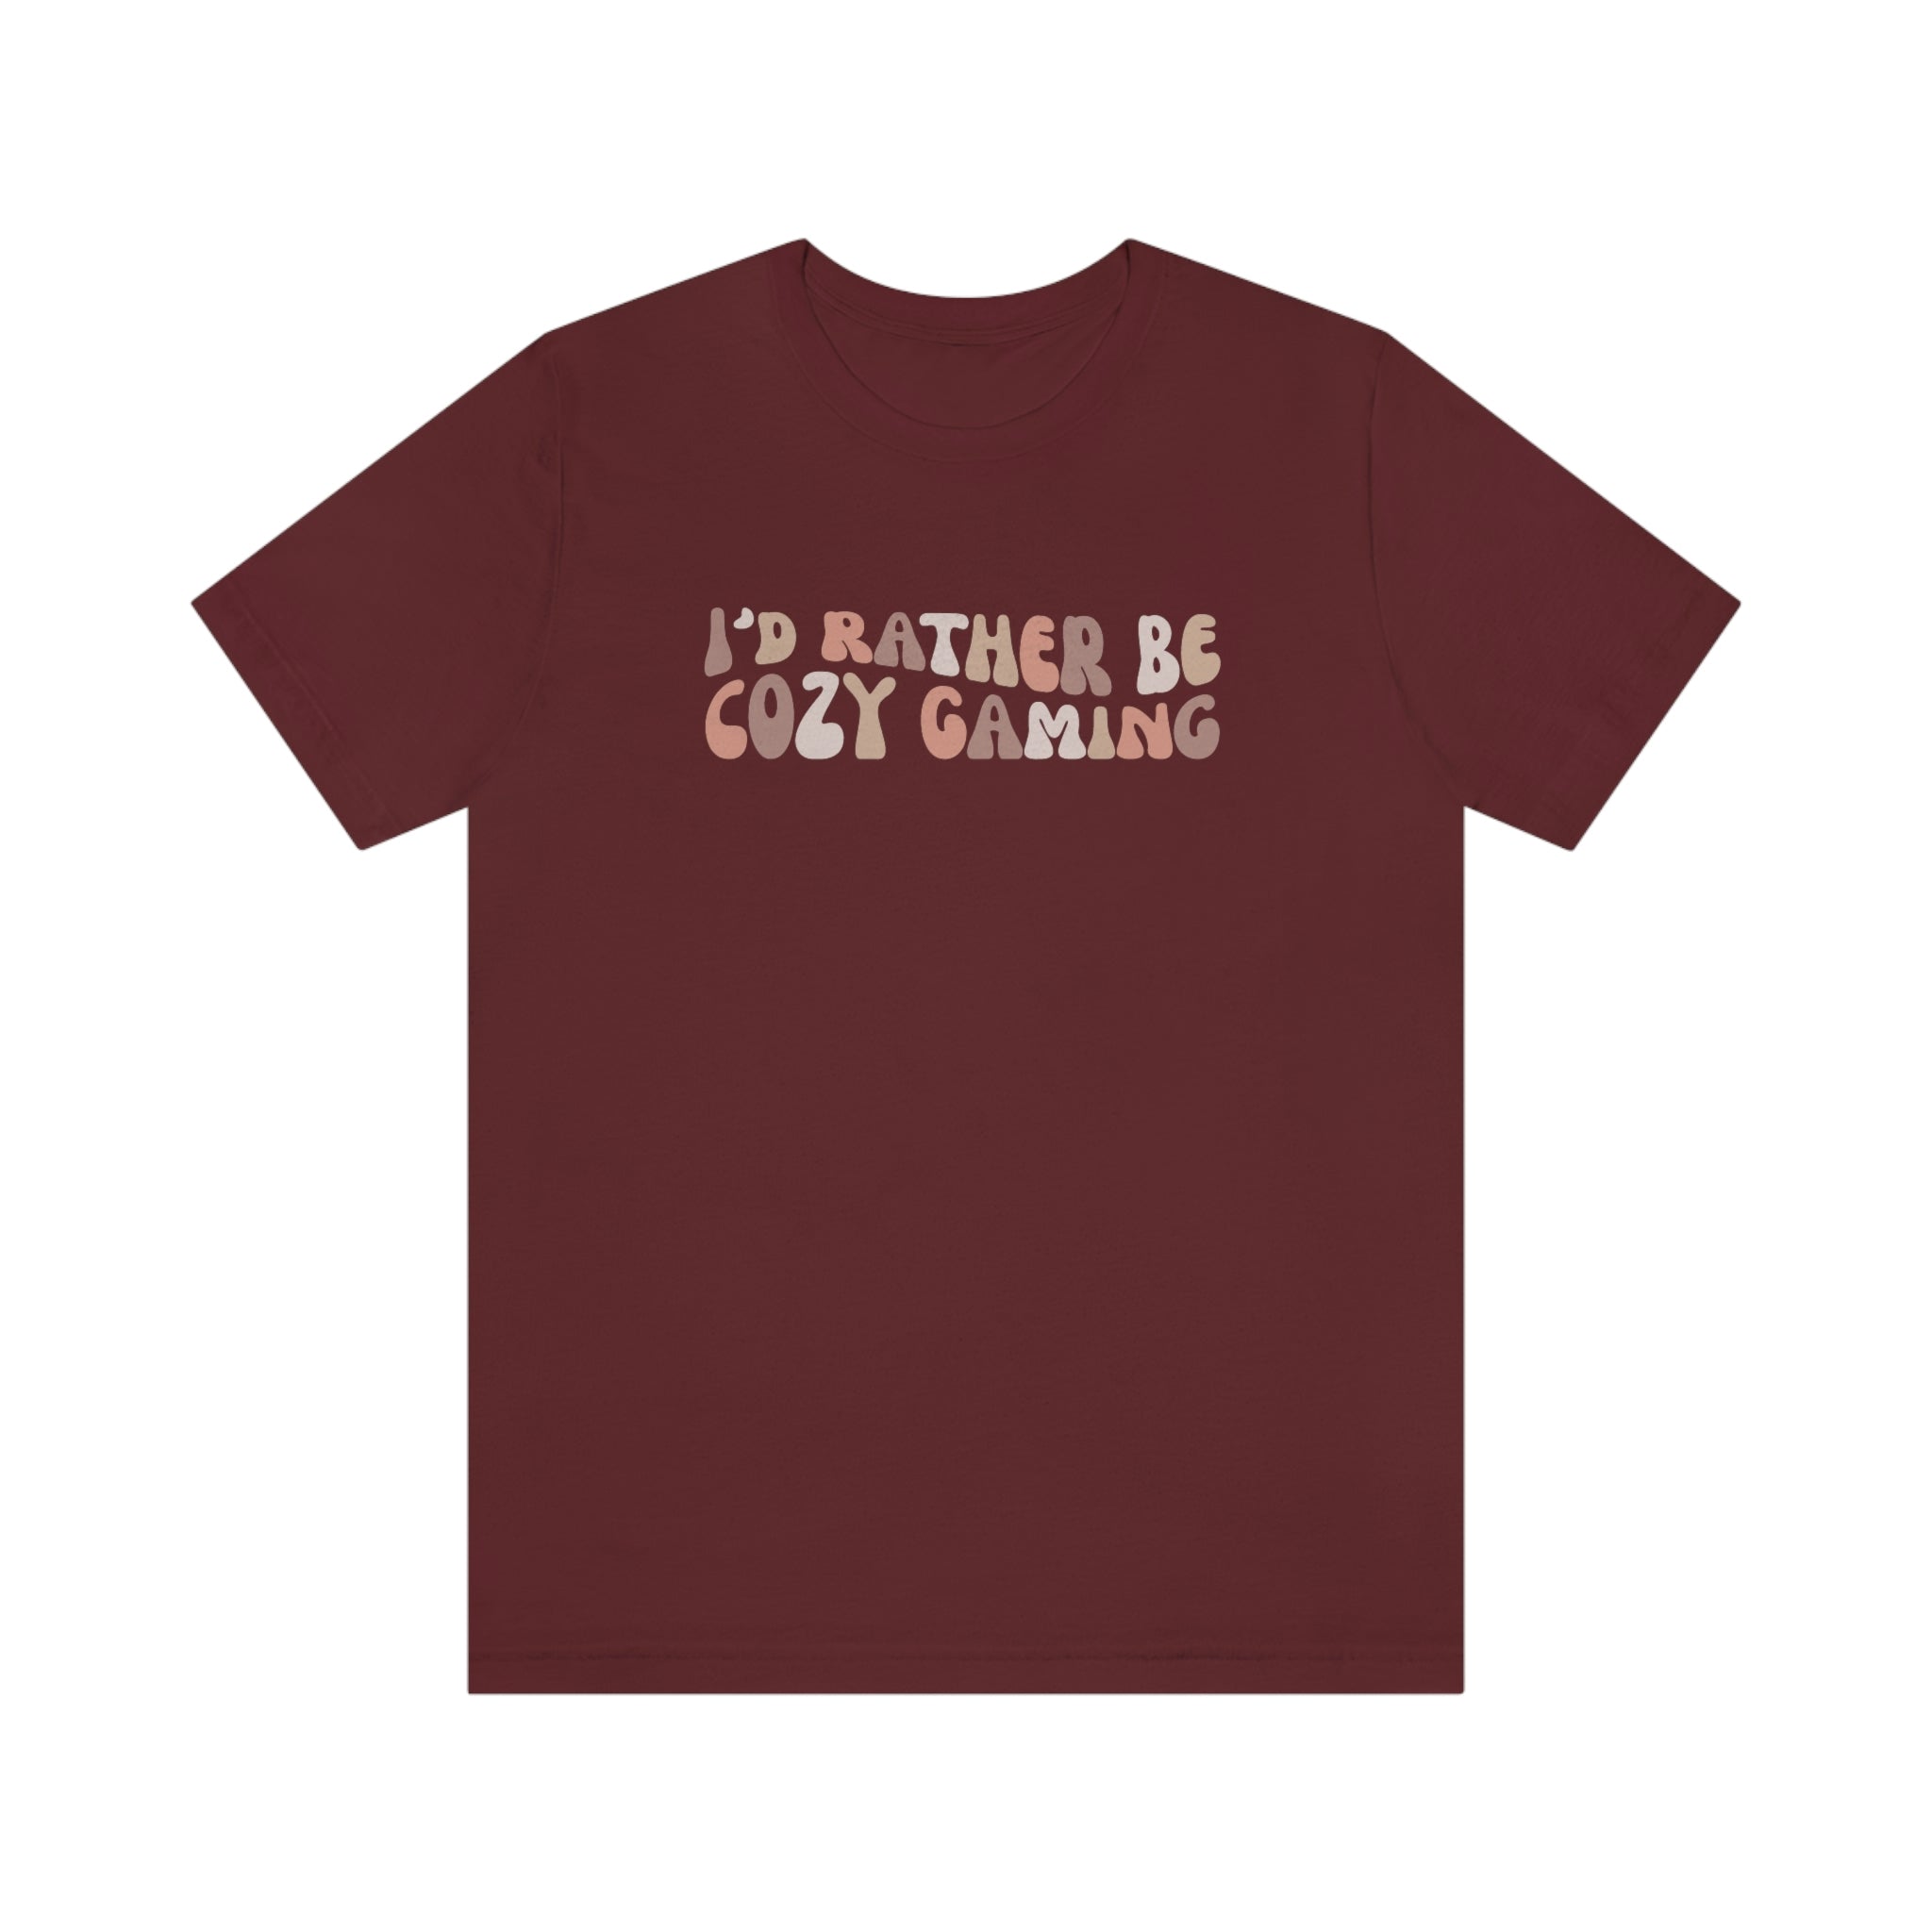 I'd Rather Be Cozy Gaming T-shirt - Gaming Shirt - Gift for Gamers - Short Sleeve